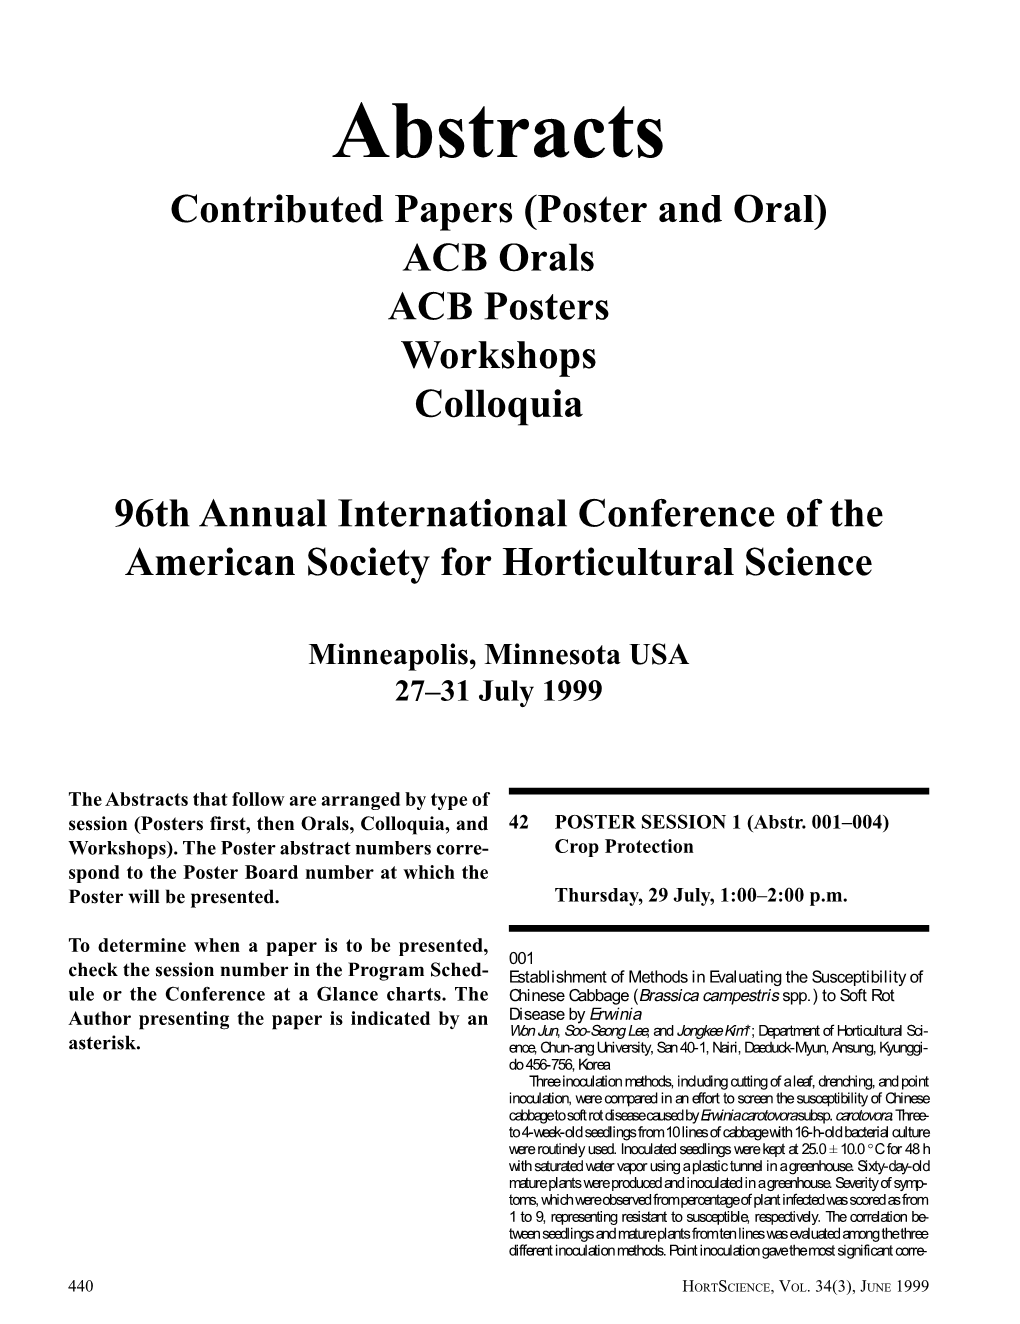 Abstracts for the 96Th Annual International Conference of The